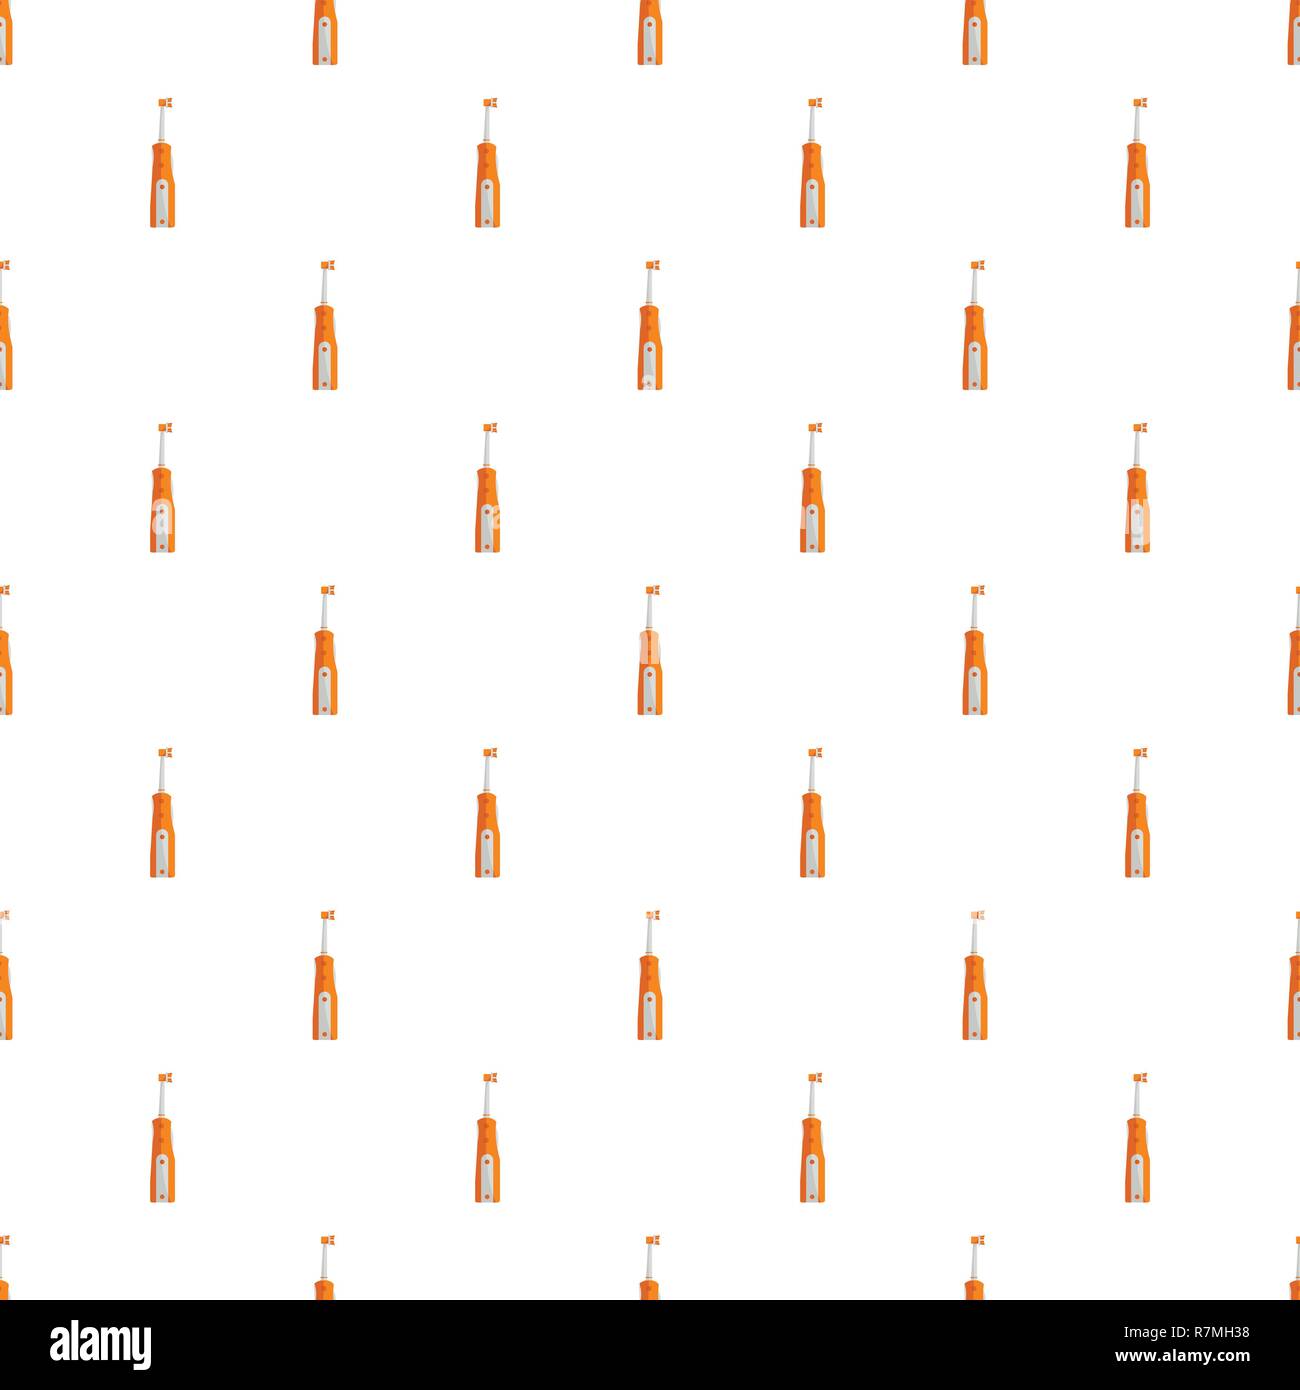 Protecting toothbrush pattern seamless vector repeat for any web design Stock Vector